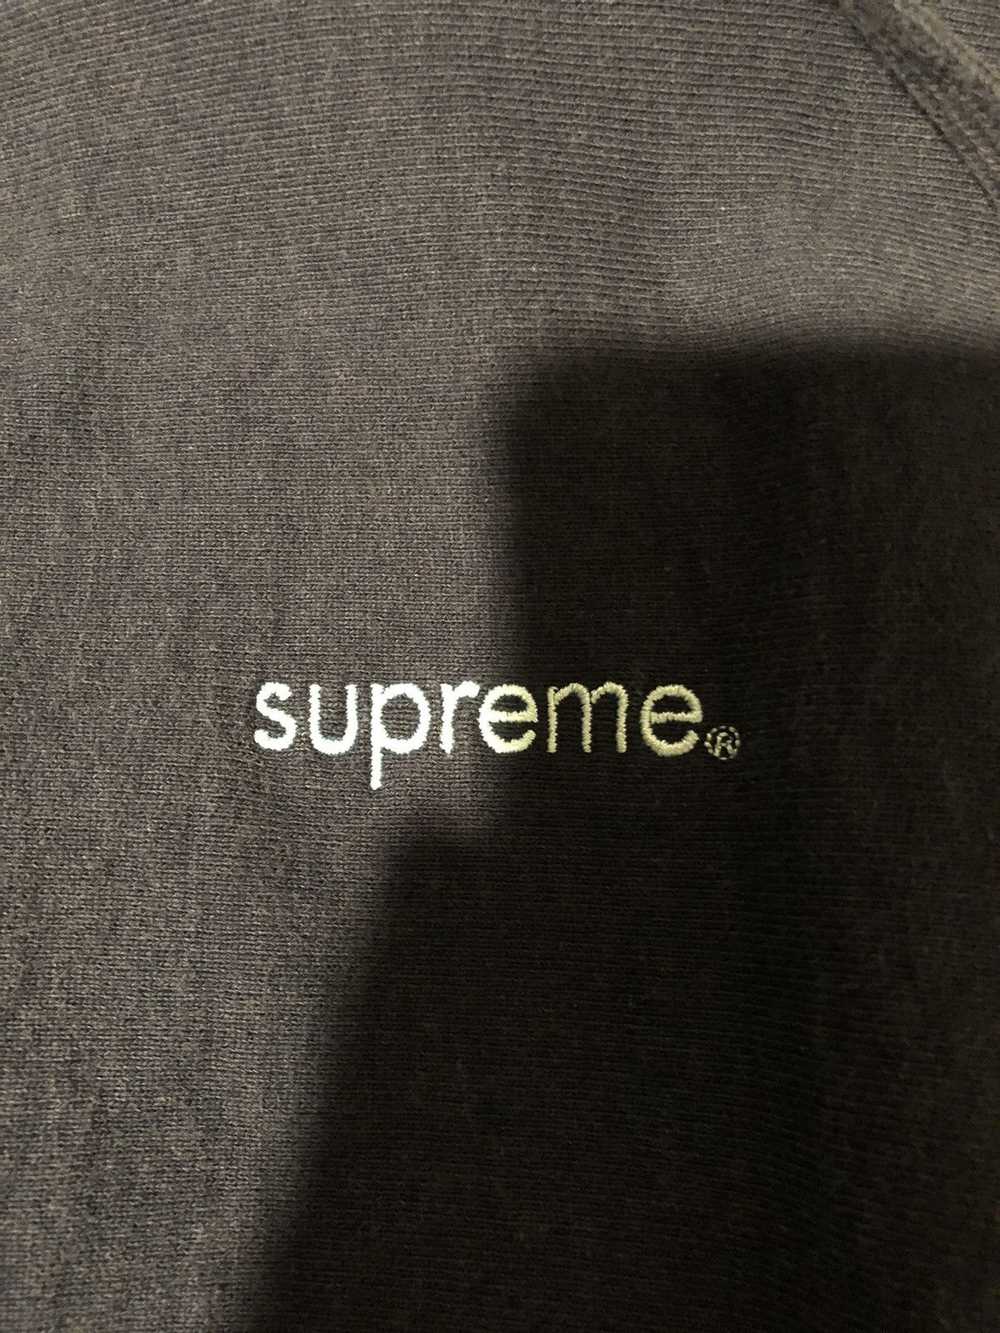 Supreme Compact Logo Hoodie Navy THICK HEAVYWEIGHT - image 2